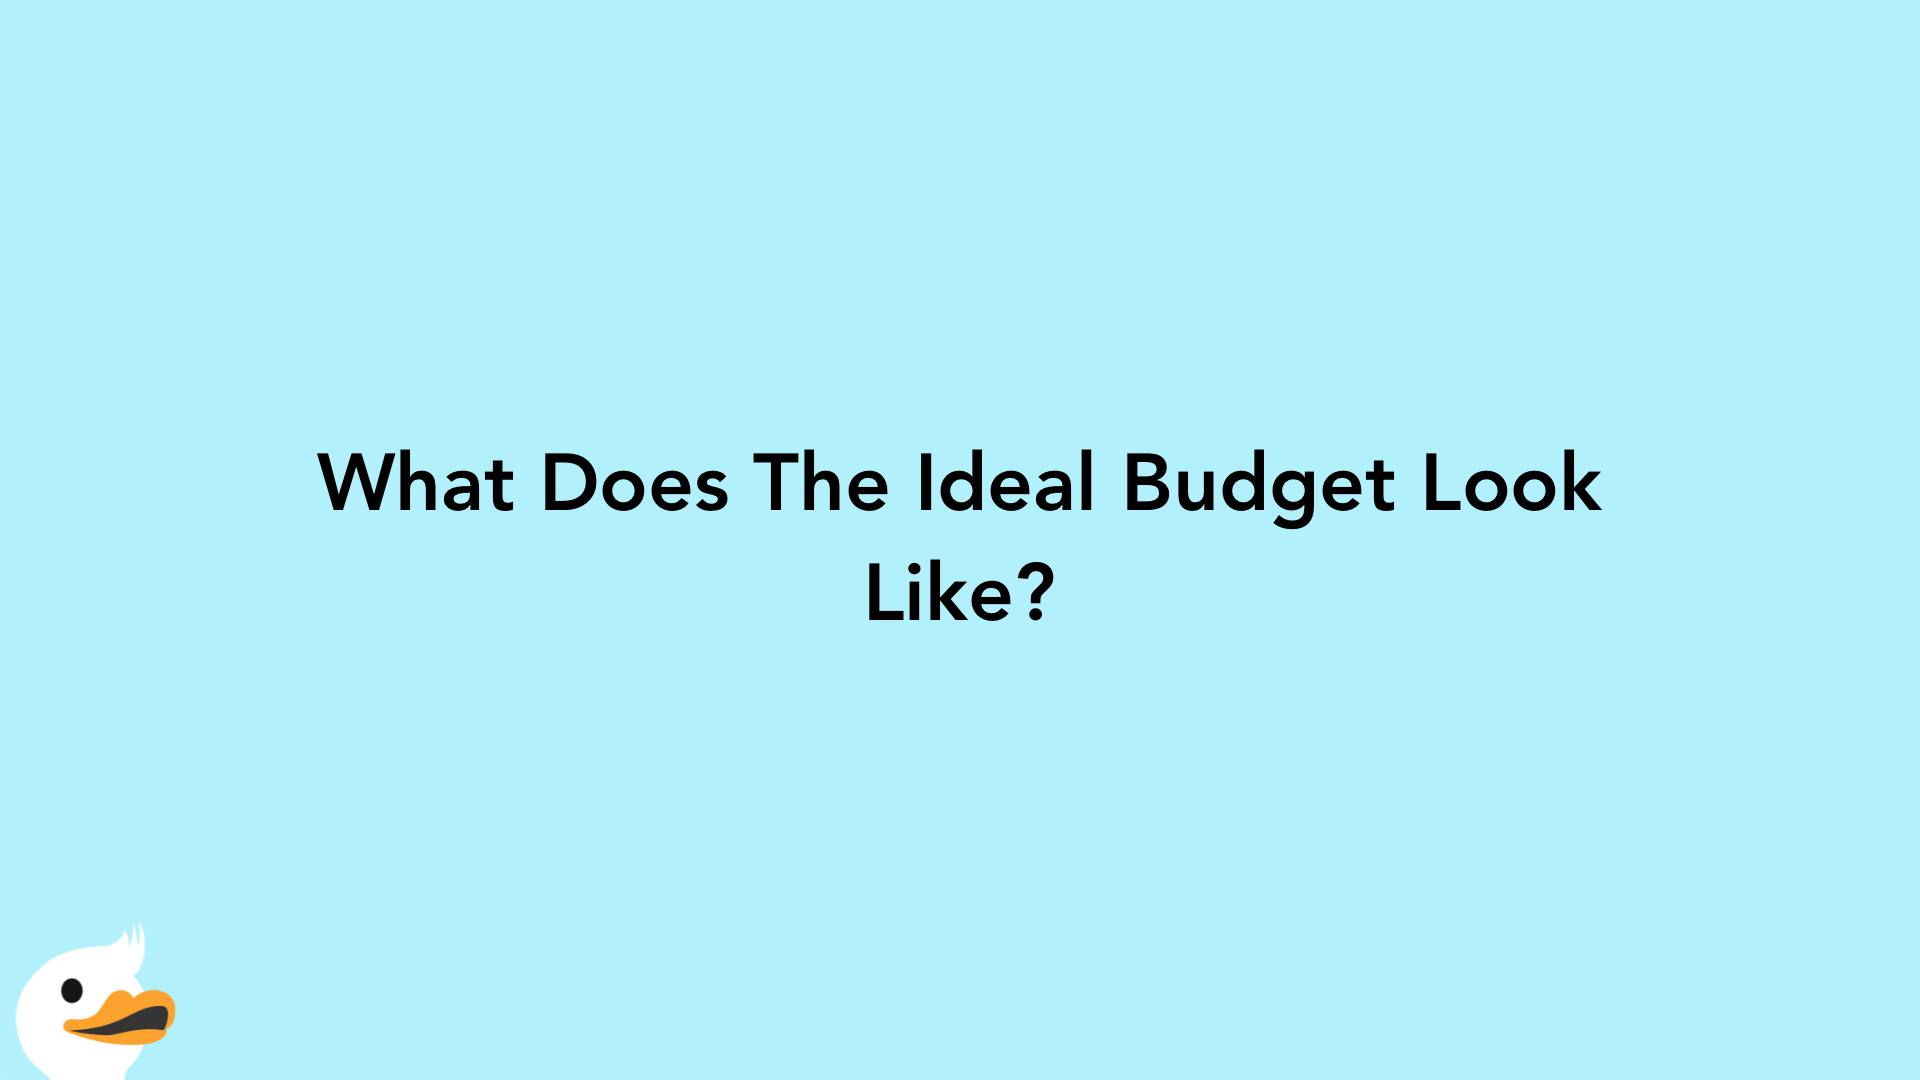 What Does The Ideal Budget Look Like?